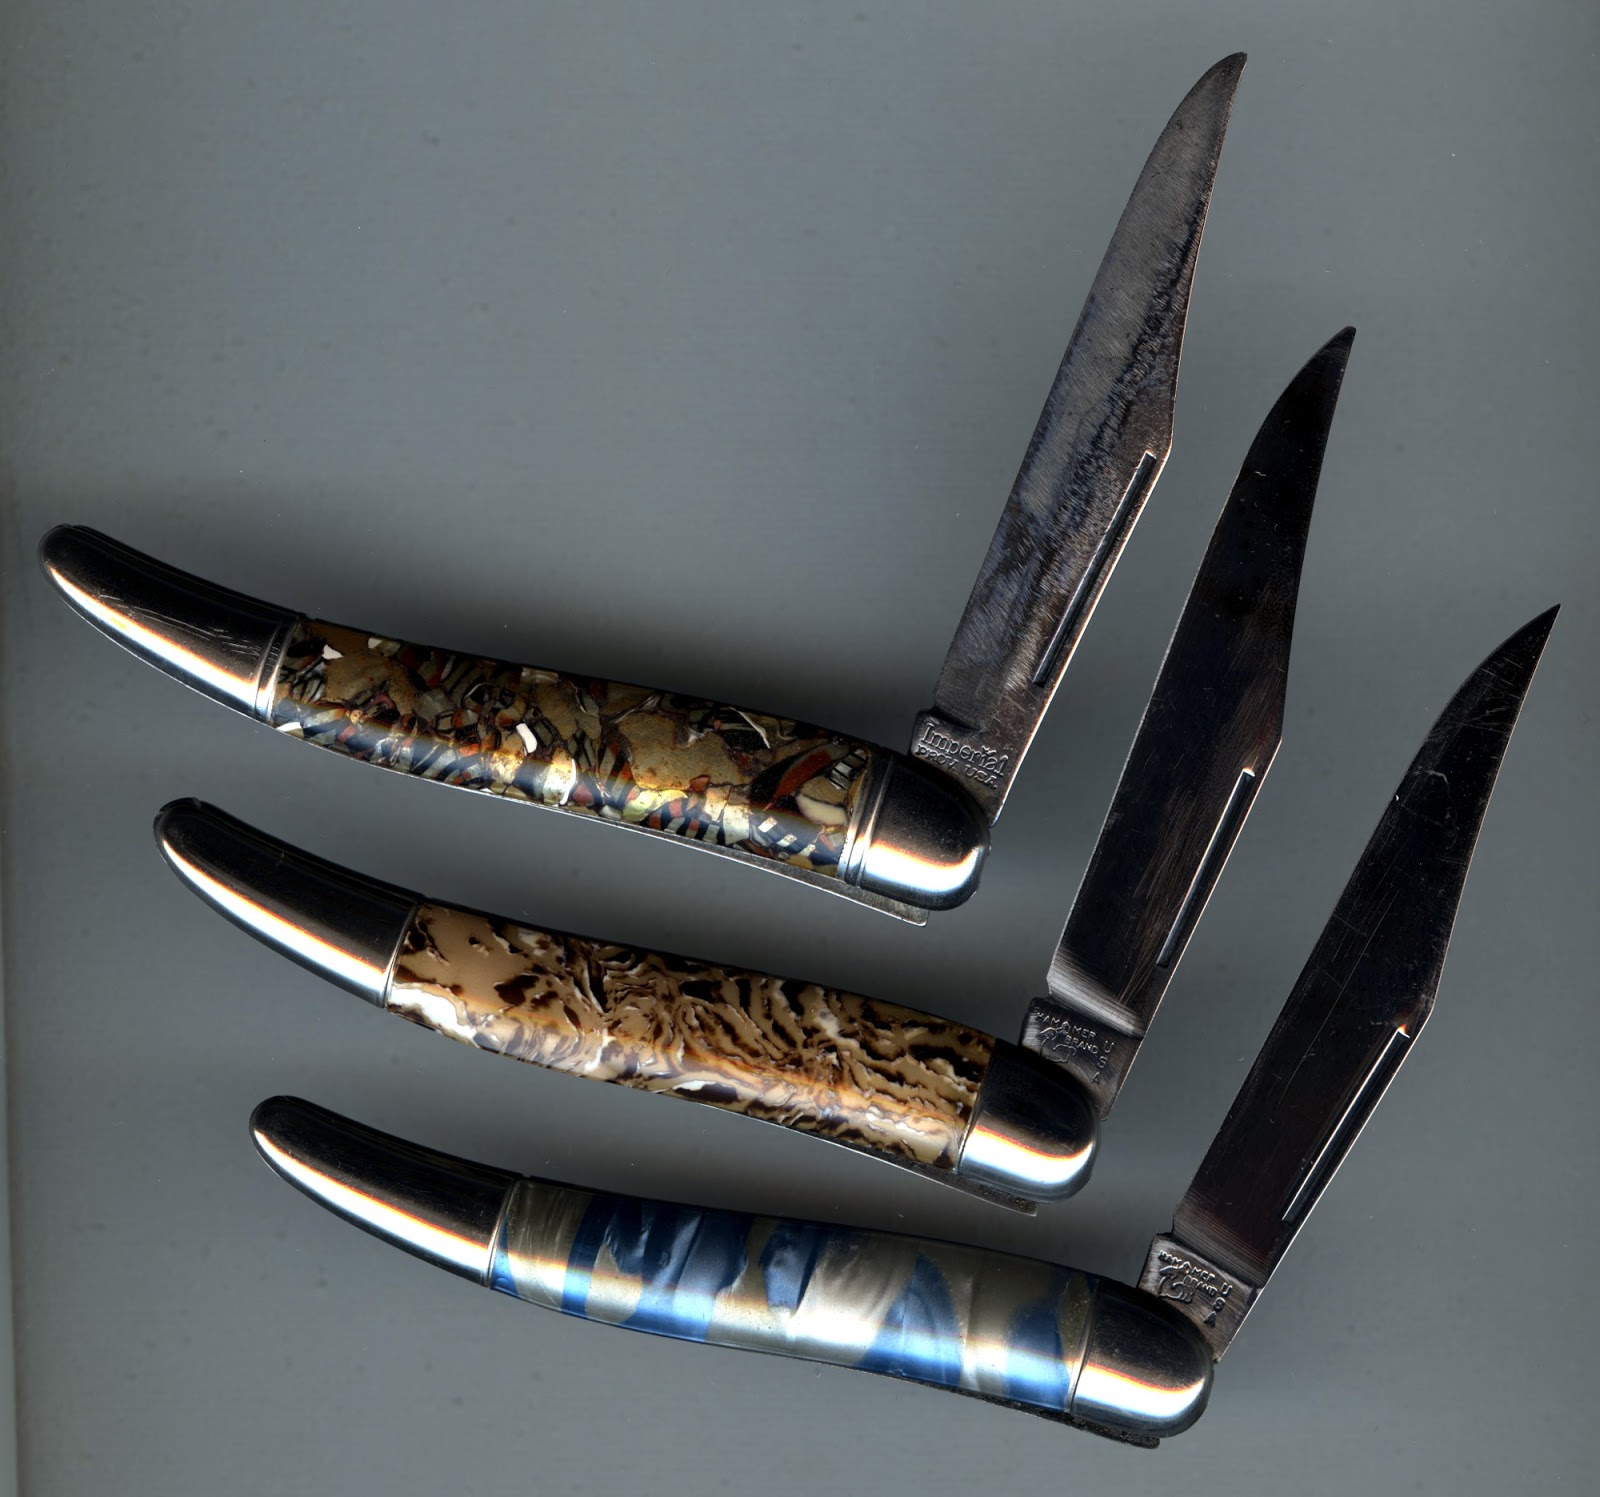 The Blade Blog: Imperial and Hammer Brand toothpick knives on